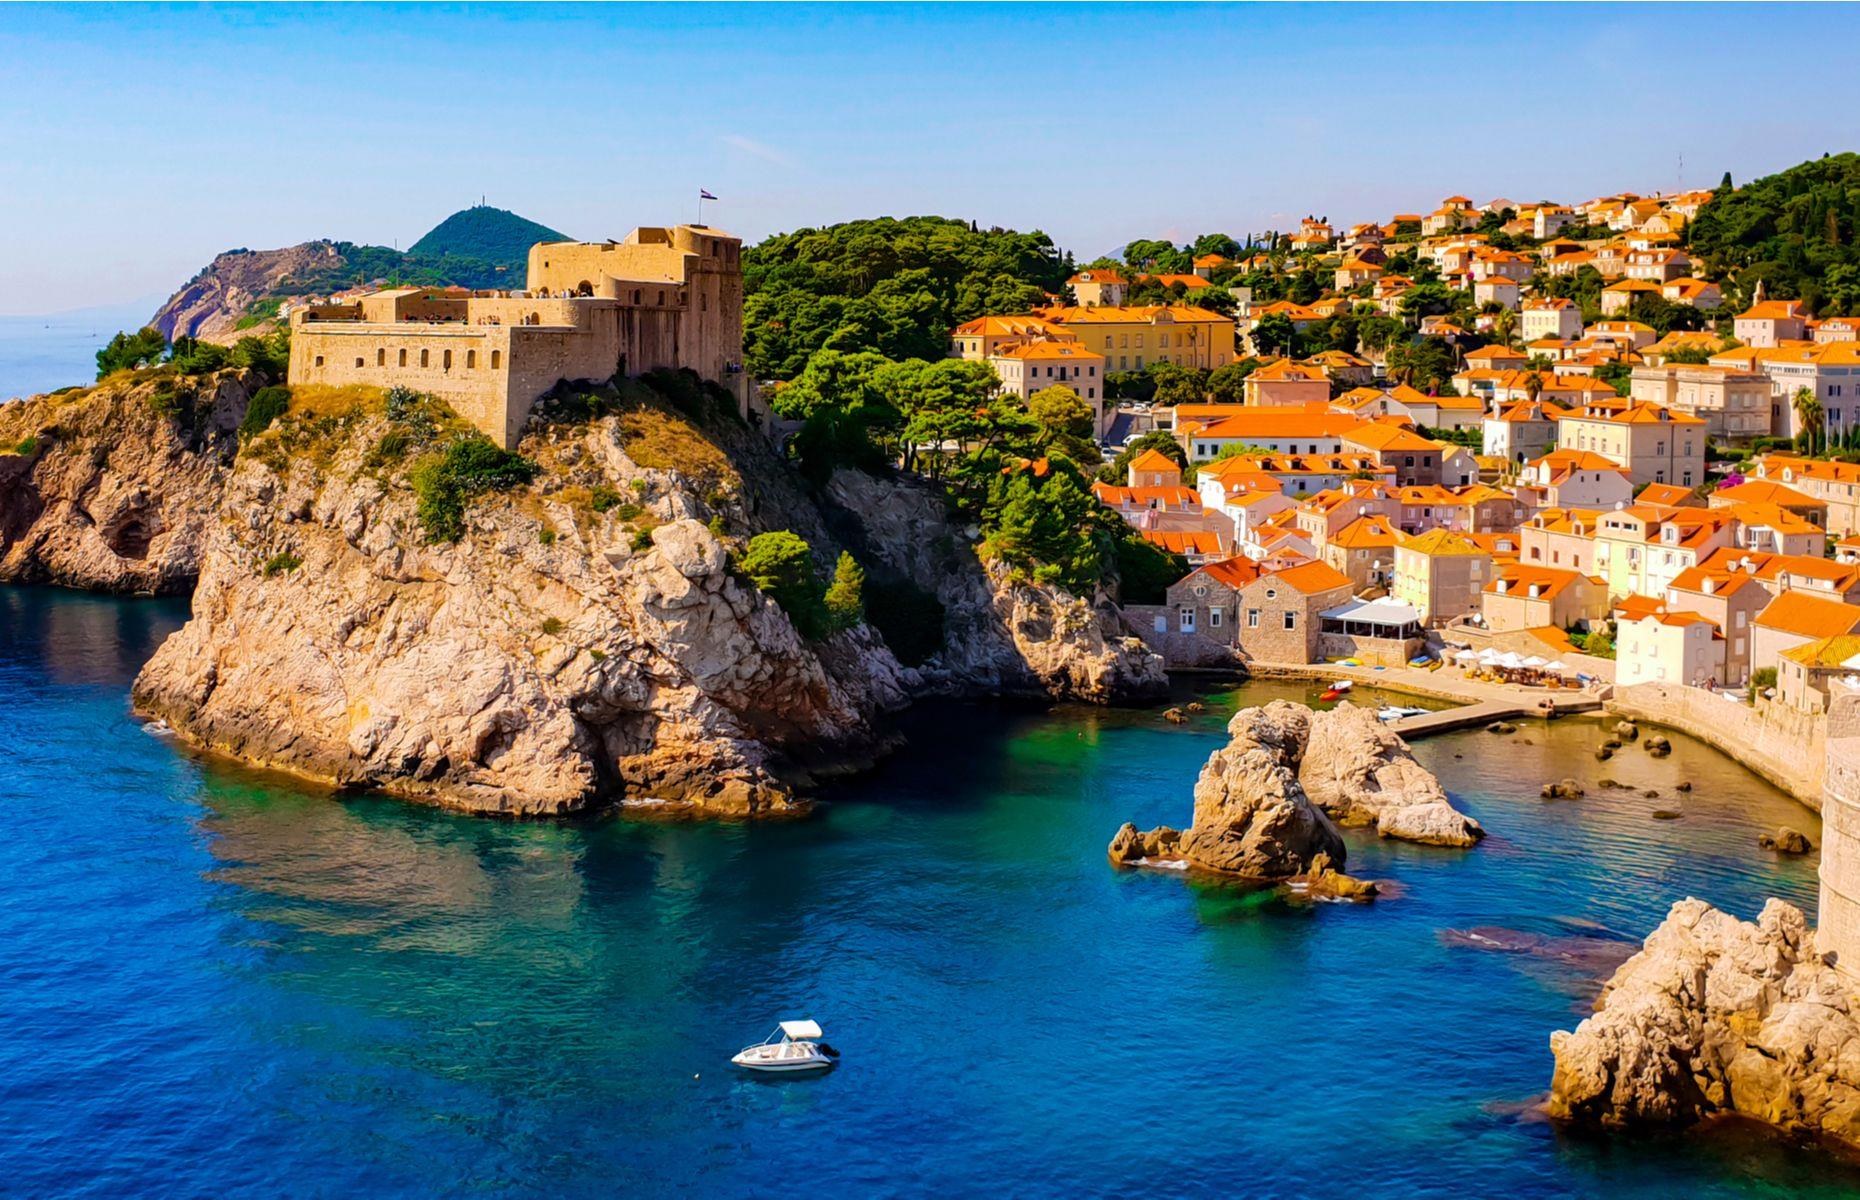 This walled medieval city, formerly called Ragusa, is set on a rocky outcrop in the southern tip of Croatia, looking out over the Adriatic. For centuries, Dubrovnik rivalled Venice as a trading port and its stone walls, built between the 11th and 17th centuries, gave the city vital protection. After damage wrought during the Bosnian War in the 1990s, the city is back to its former beauty.